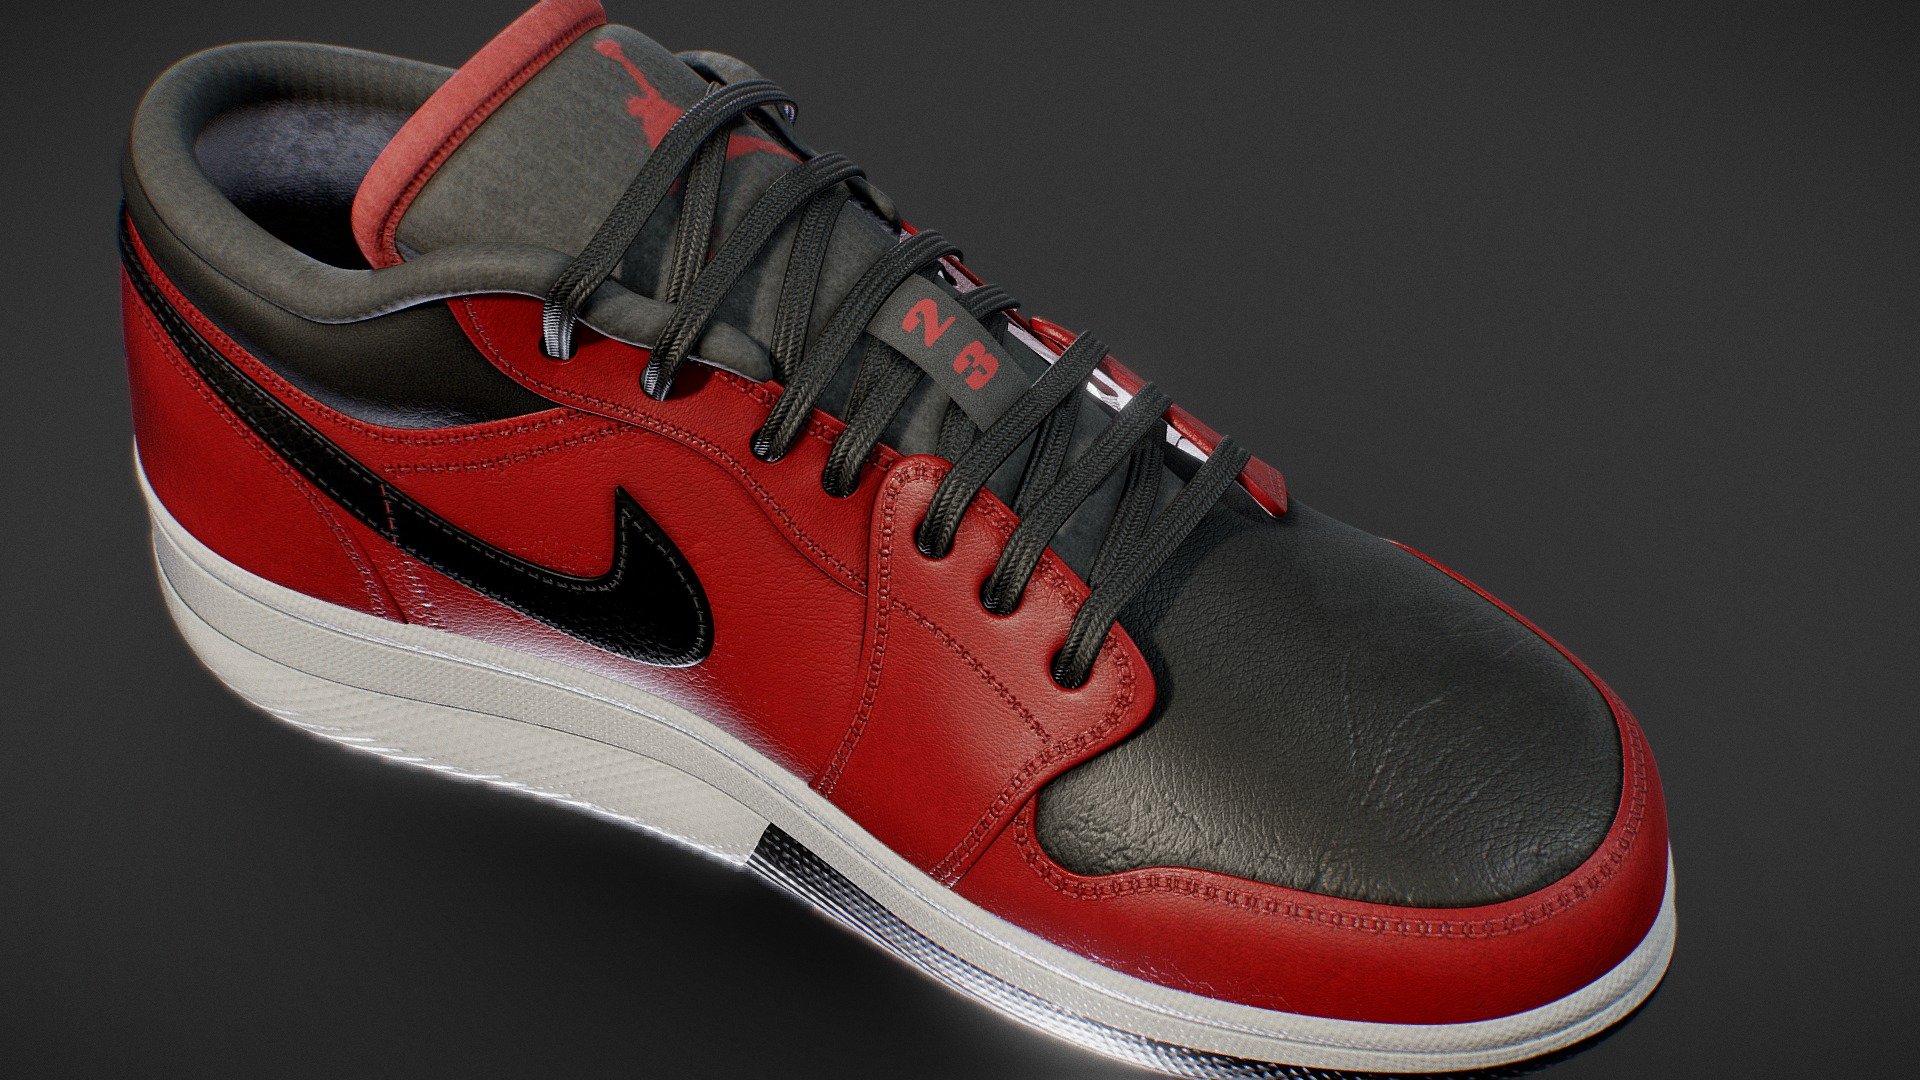 Inspired by the original that debuted in 1985, the Air Jordan 1 Low offers a clean, classic look that's familiar yet always fresh. It's made for casual mode, with an iconic design that goes with everything and never goes out of style.
It's my first time to do texture with substance painter, so its just for practice.
I have completed this personal project on April 2021 with total 57 Renders.
I have model this shoe in Autodesk Maya, it's a concept design of original Nike air jordan 1 Low, I have used displacement map for sole pattern created in substance painter.
I have used Luxion Keyshot for render, the Nike light on the background with smoke created in Adobe Photoshop.
What you think about it? let me know in the comment section.


MadeWithSubstace #AutodeskMaya #LuxionKeyshot #AdobePhotoshop
Render work April 2021
3D Model created April 2021

Original texture in my renders is 8K.*

My artstation Profile
https://www.artstation.com/abhishekshukla
render
https://www.artstation.com/artwork/NxvVrJ - Nike Air Jordan 1 Low Red - 3D model by Abhishekshukla 3d model